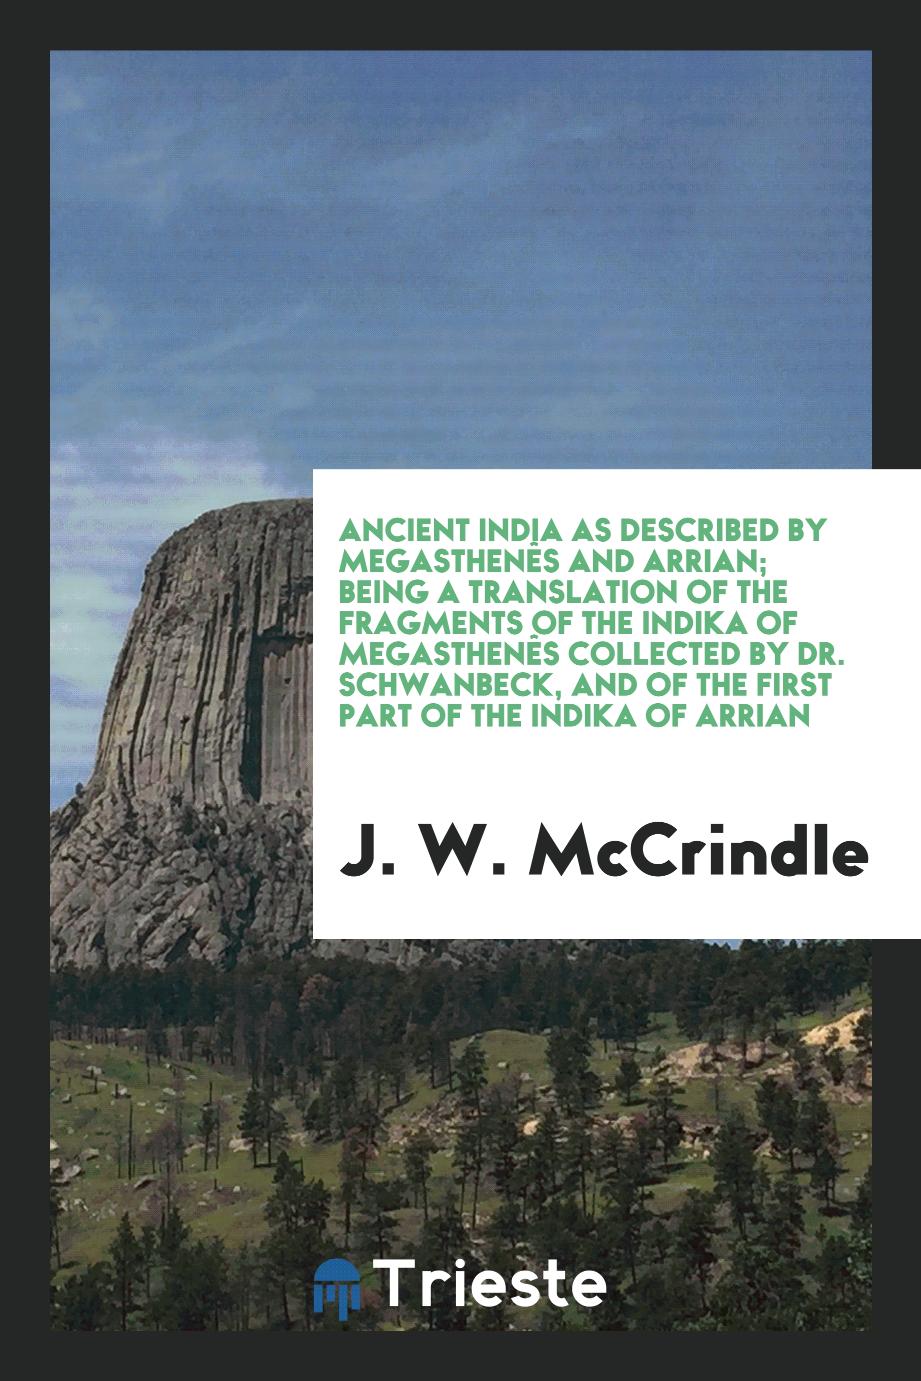 Ancient India as Described by Megasthenês and Arrian; Being a Translation of the Fragments of The Indika of Megasthenês Collected by Dr. Schwanbeck, and of the First Part of the Indika of Arrian